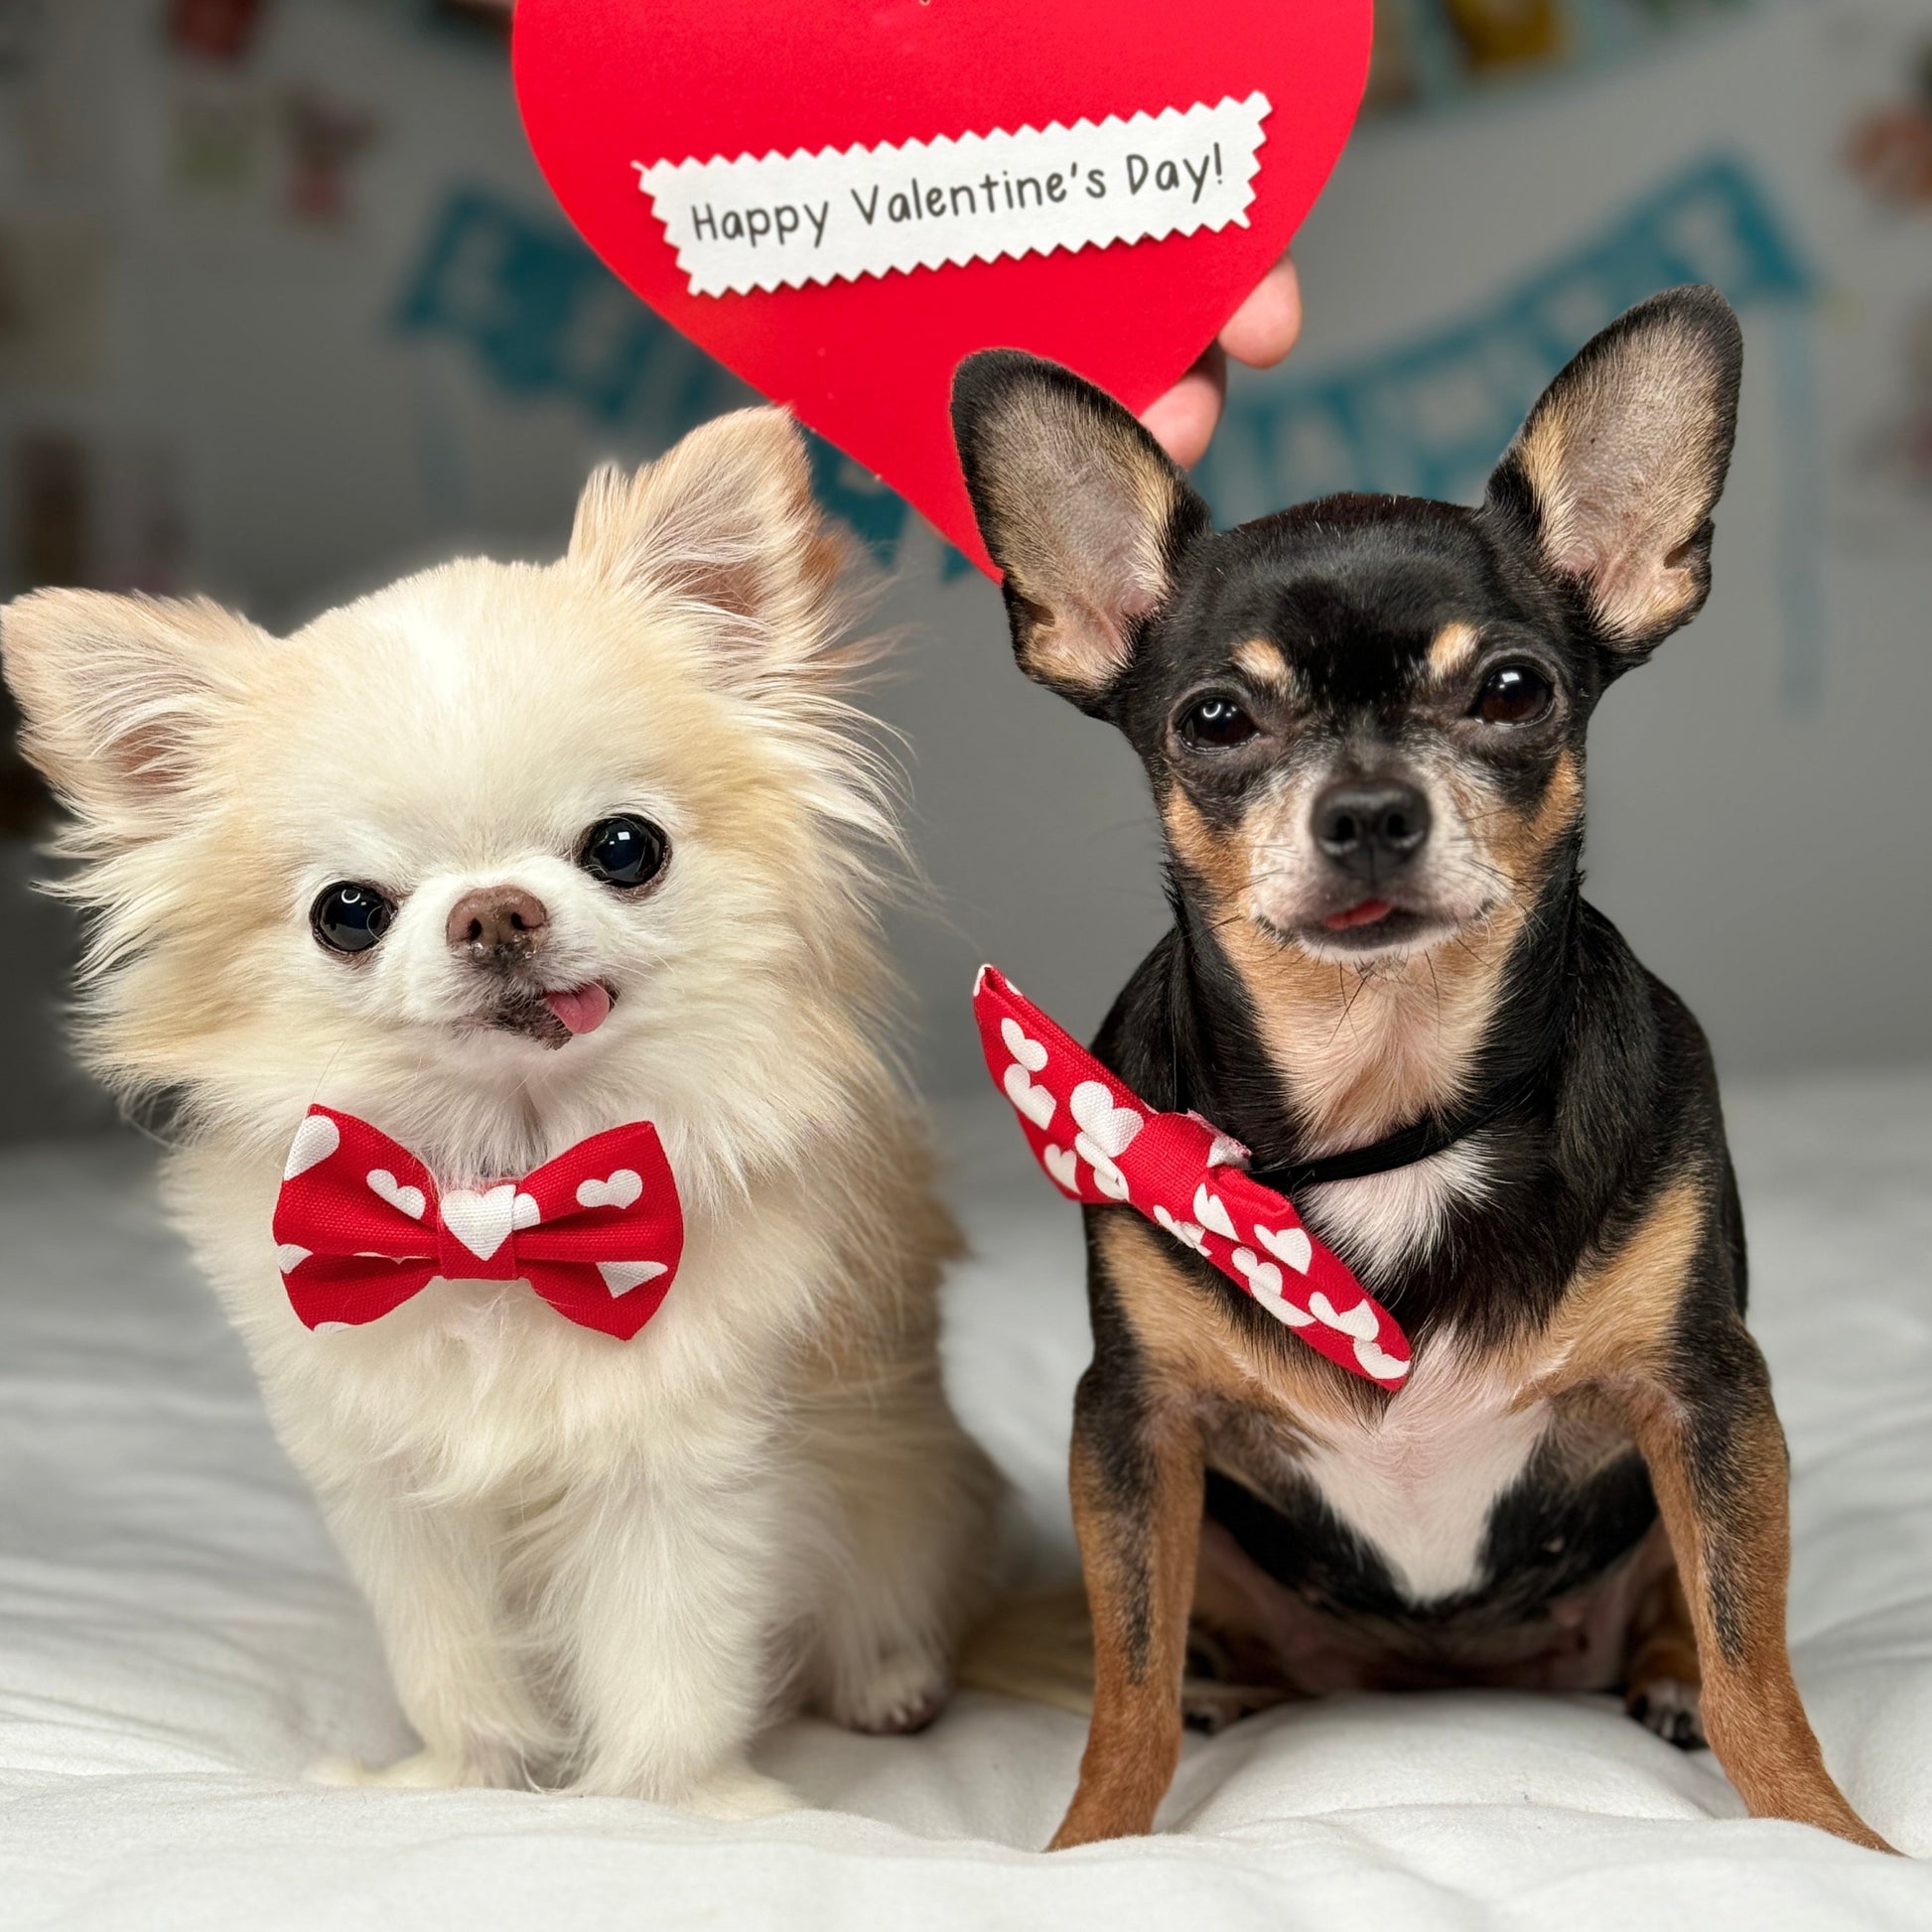 Tiny chihuahua Cedric and Maya wearing valentine's day themed bow ties. Sitting and looking straight into the camera. Above their heads is a heart shaped card that reads Happy Valentine's Day!.